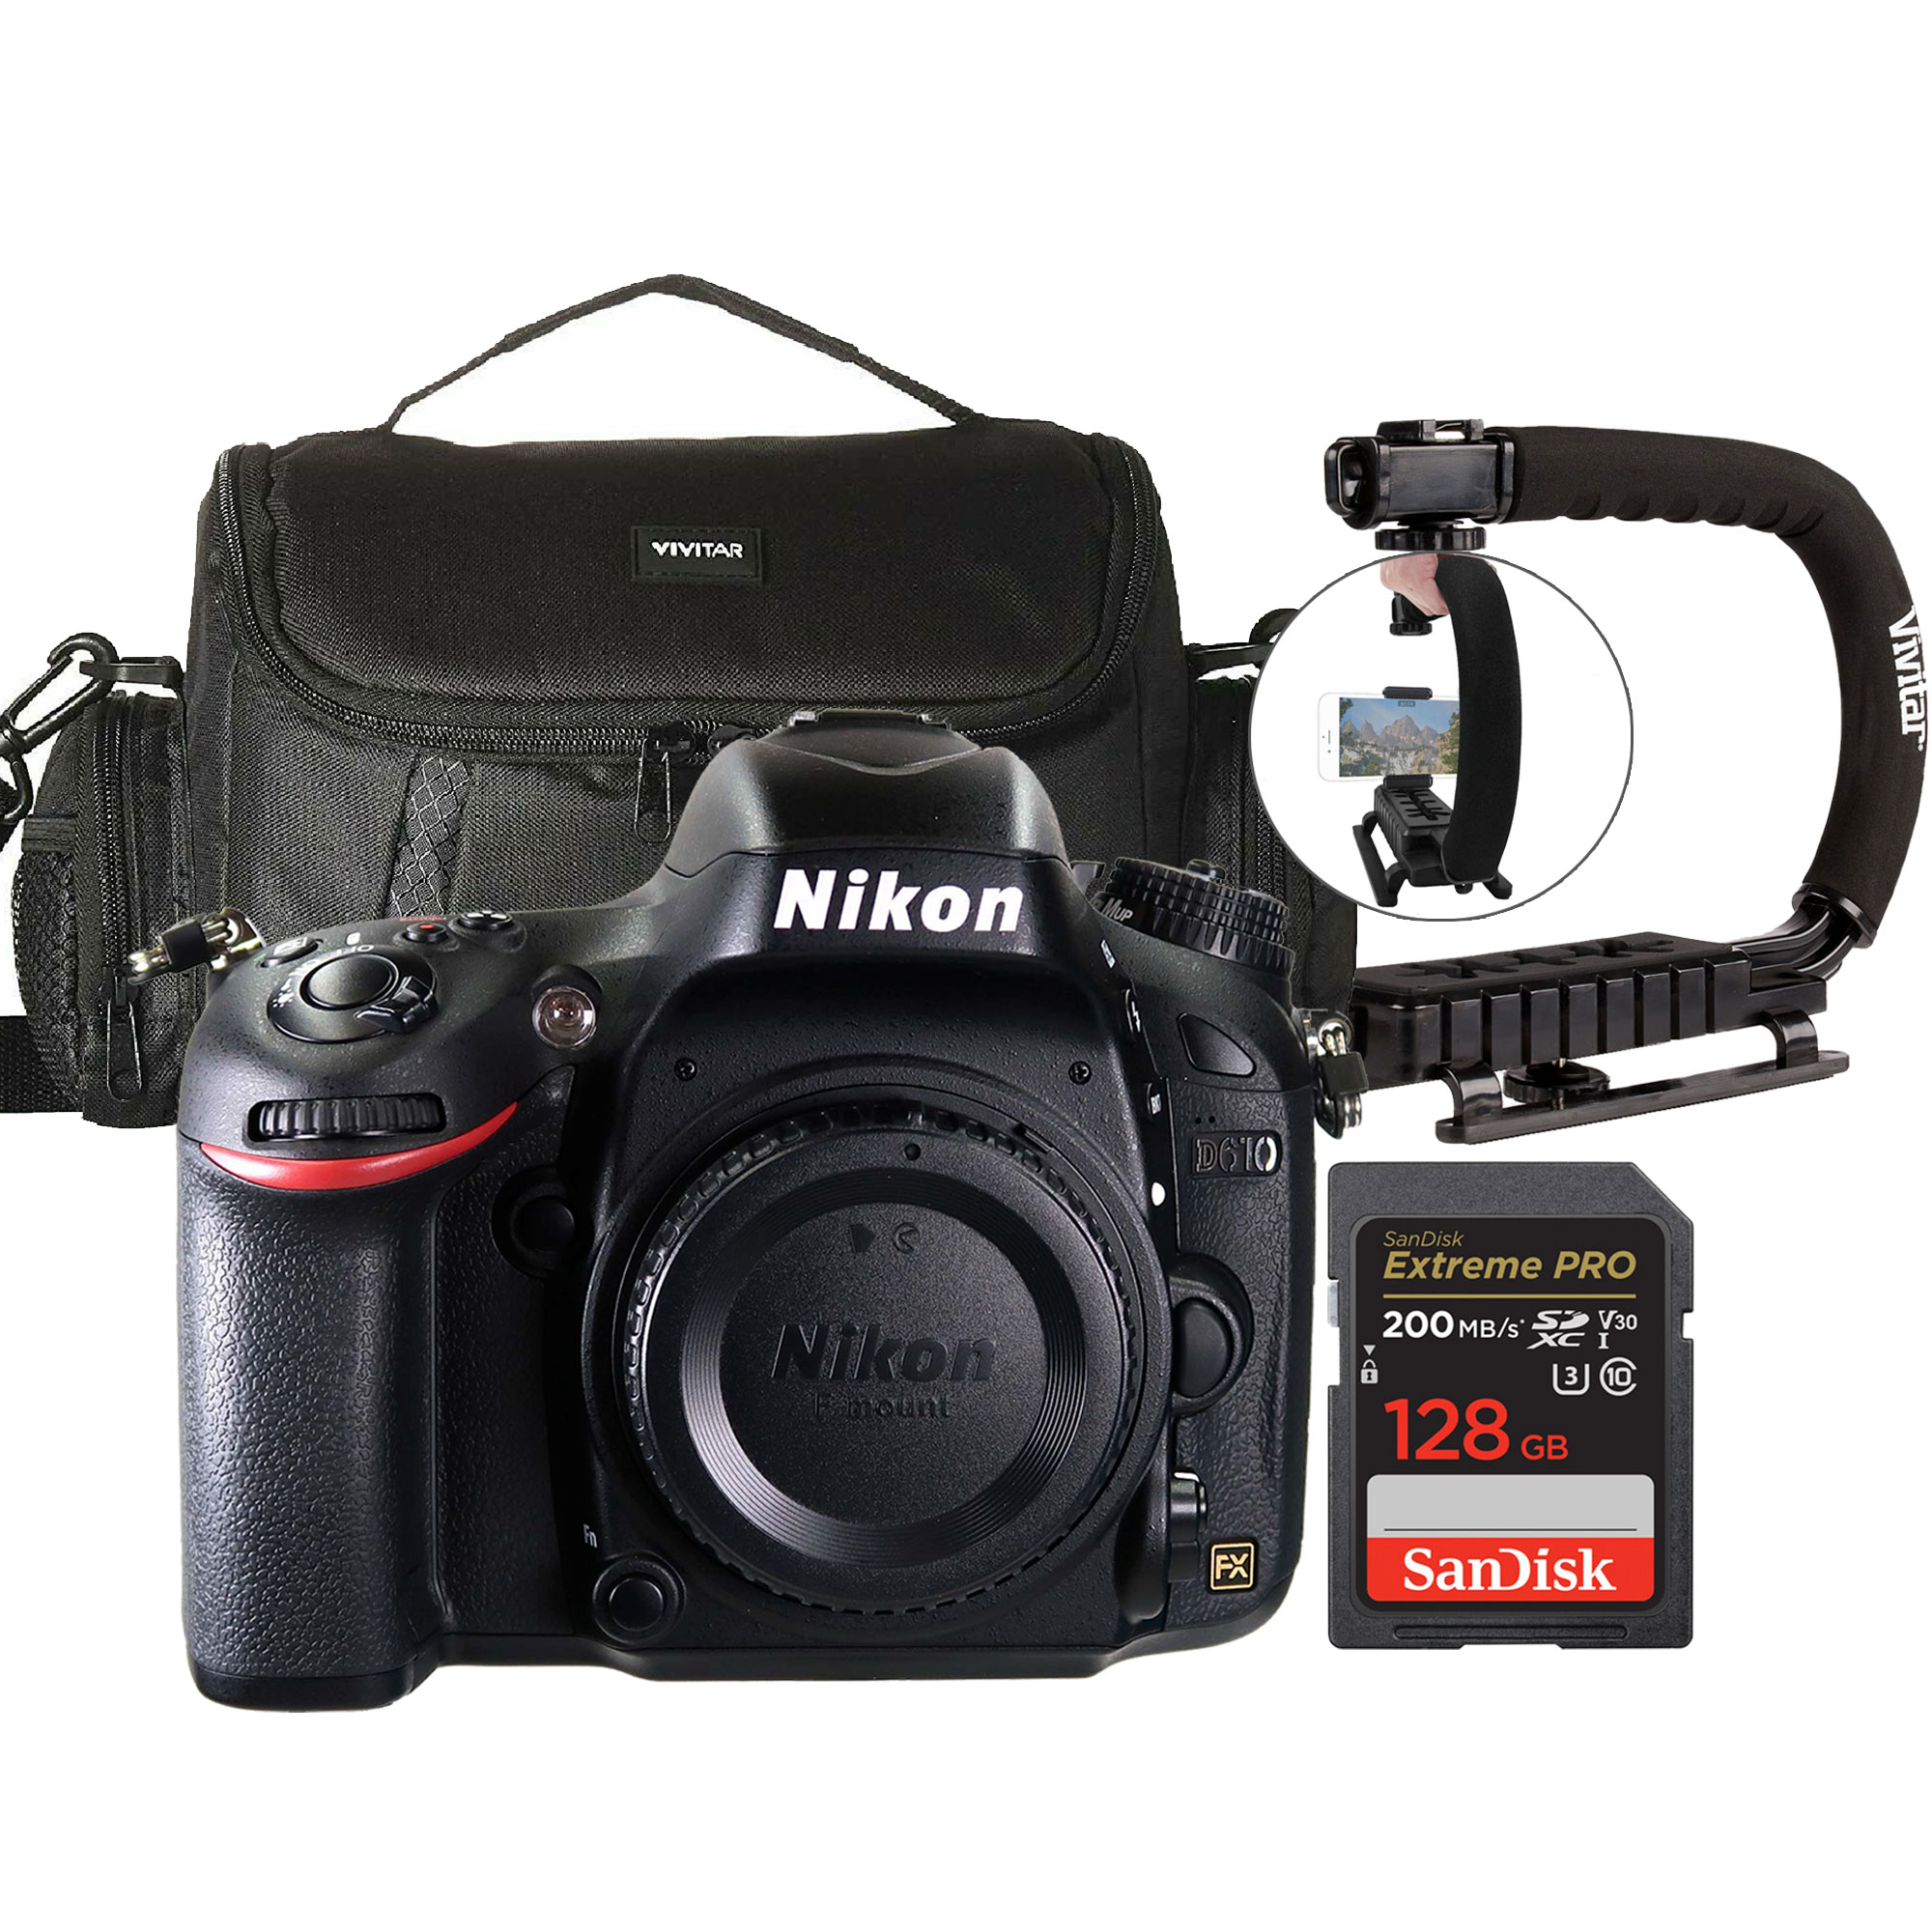 Nikon D610 DSLR Camera Body Only with Sports Action Grip Top Accessory Kit